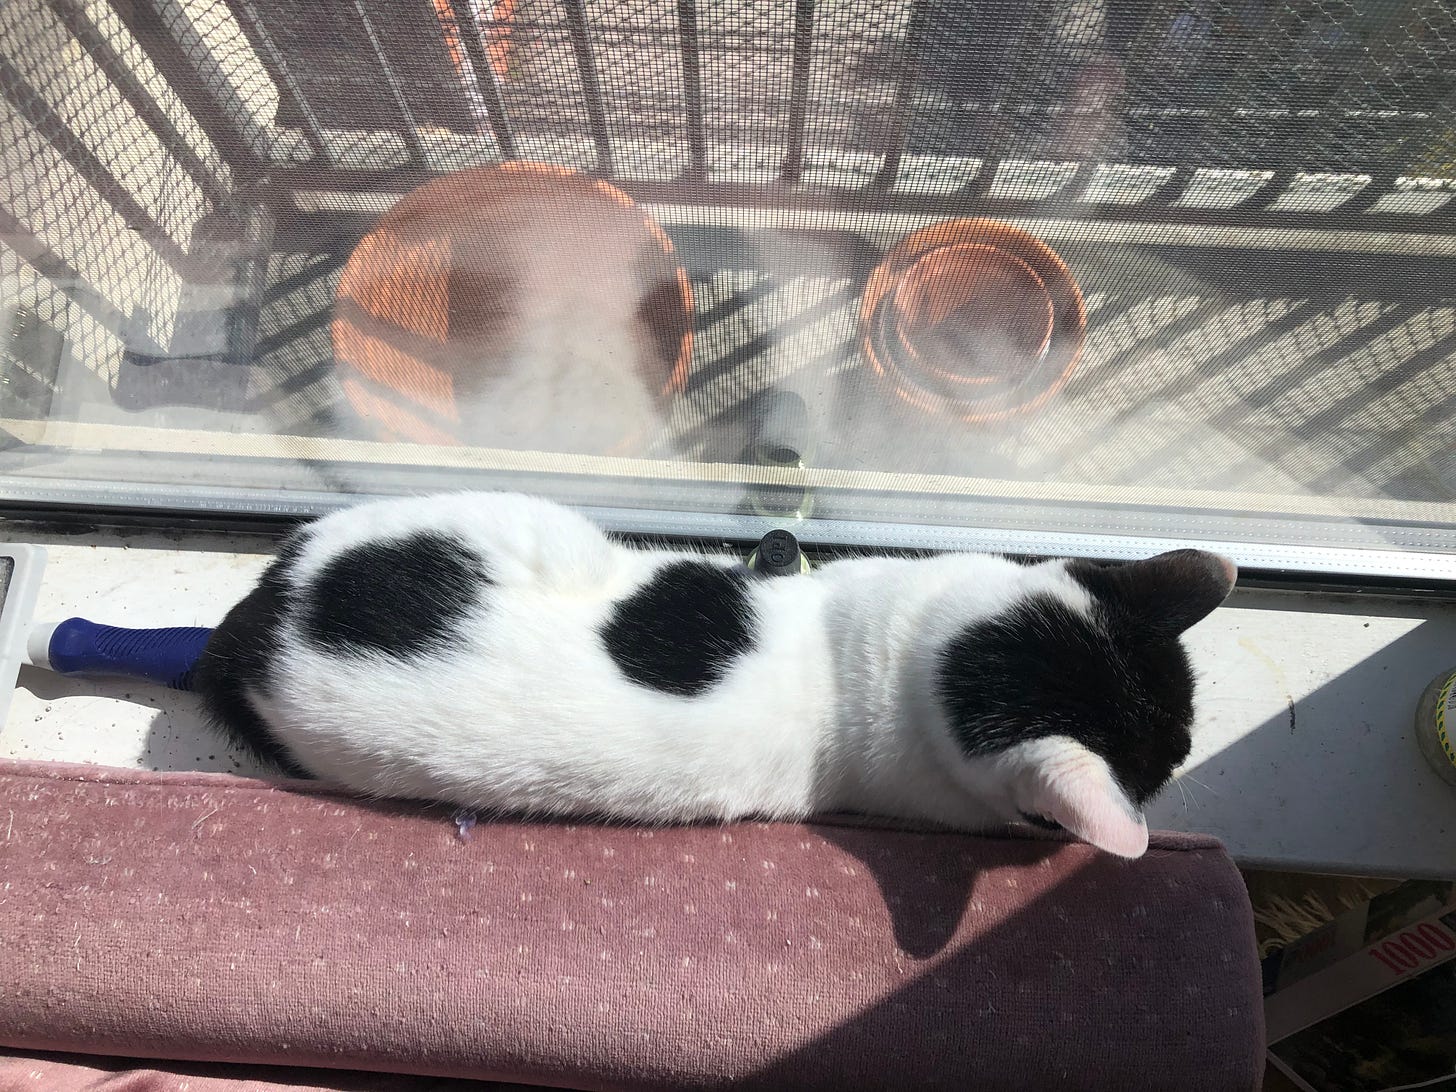 white cat with four circular patches of black fur perched on the window sill. she's between the window and a soft, lived in mauve couch. the sun is shining through the window and it looks like spring.